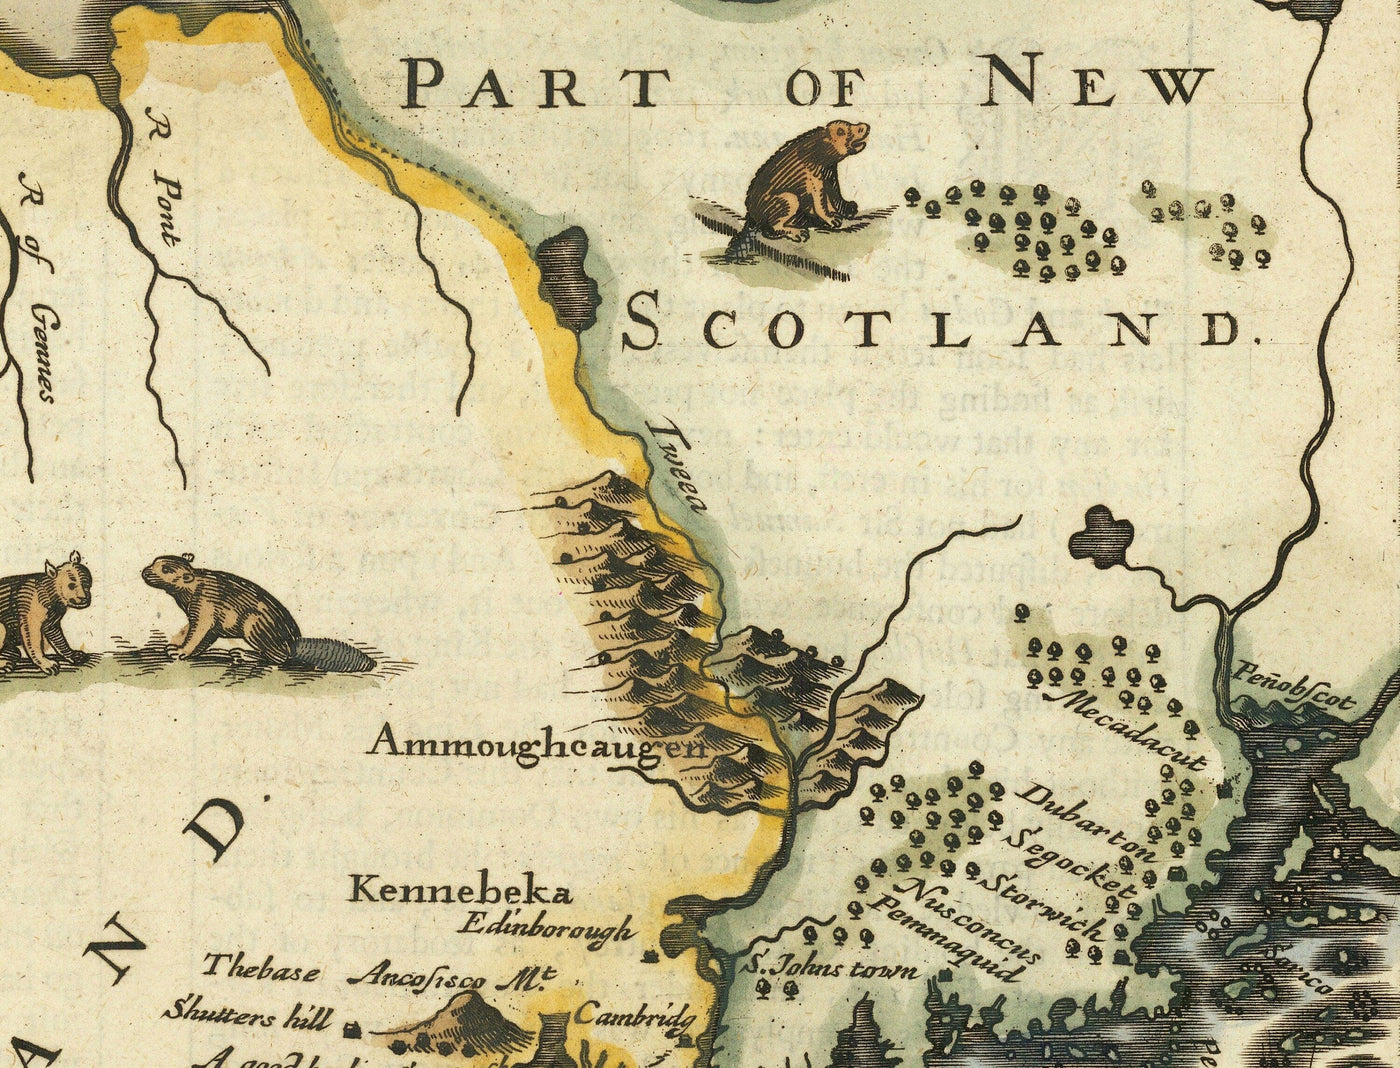 Old Map of New York & New England, 1676 by John Speed - East Coast US, New Jersey, Massachusetts, British Colonies